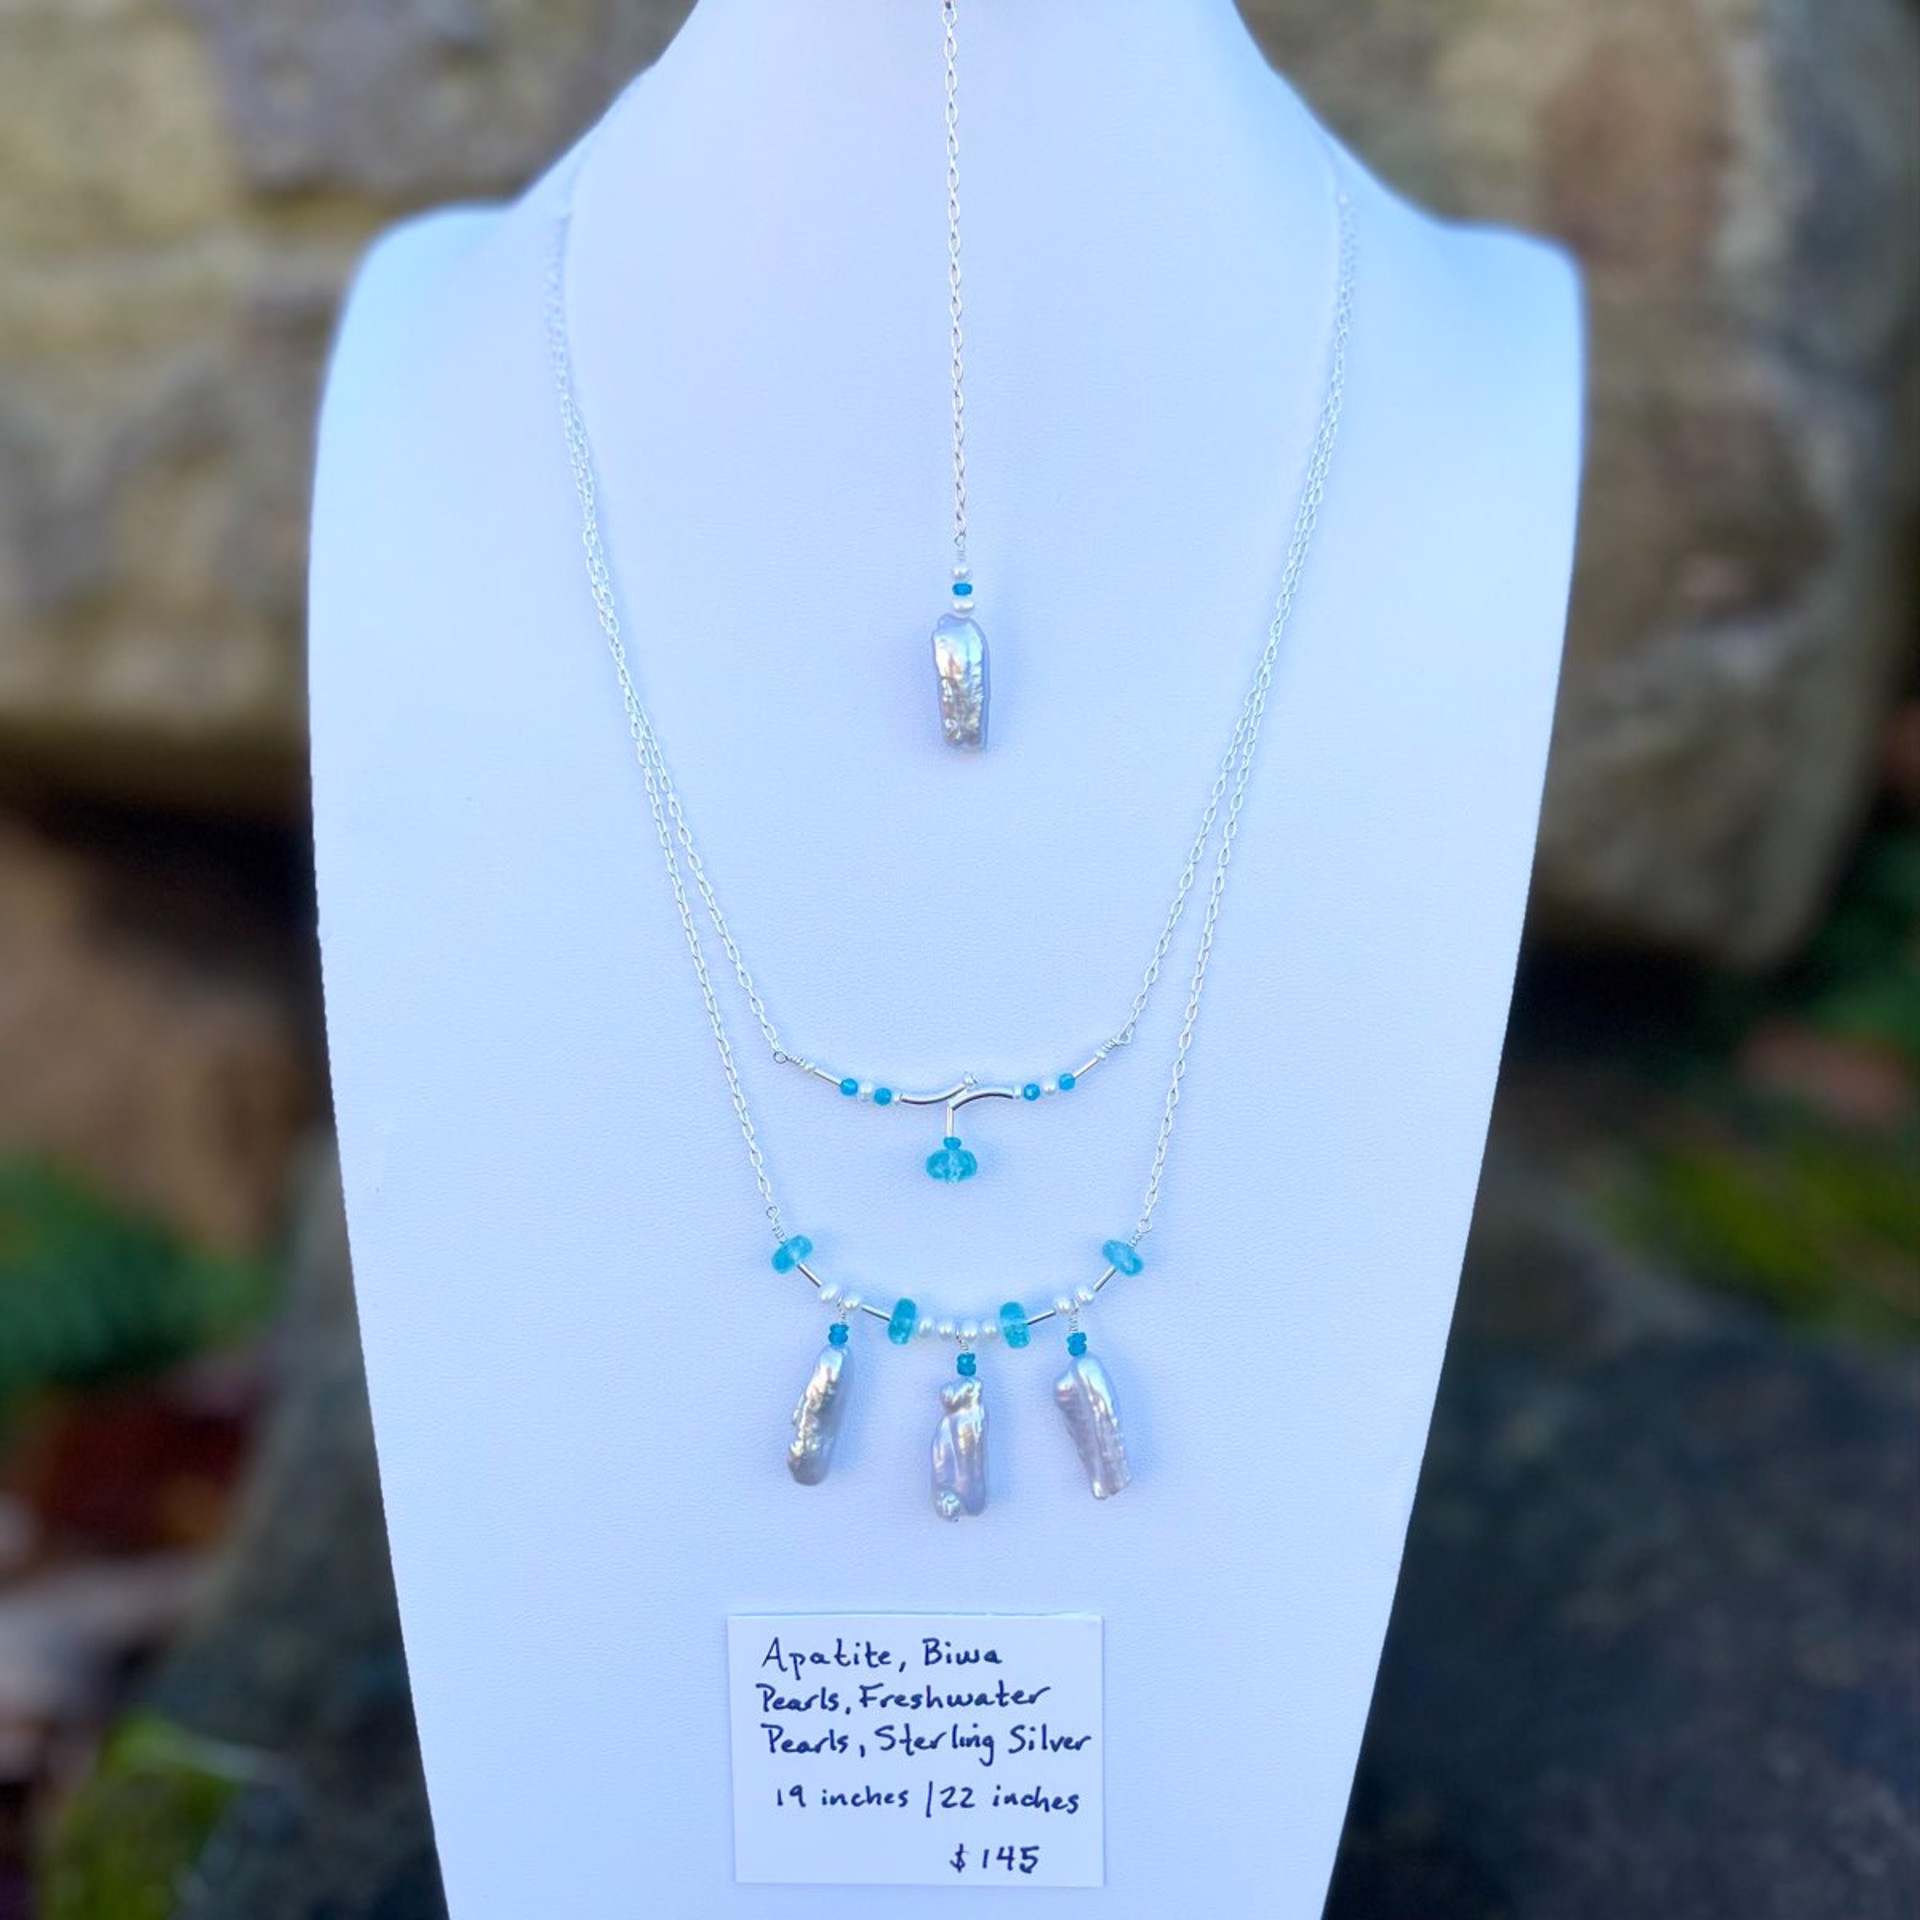 Apatite, Silver Biwa Pearls, Freshwater Pearls, & Sterling Silver Infinity Pendant Necklace Set by Lisa Kelley